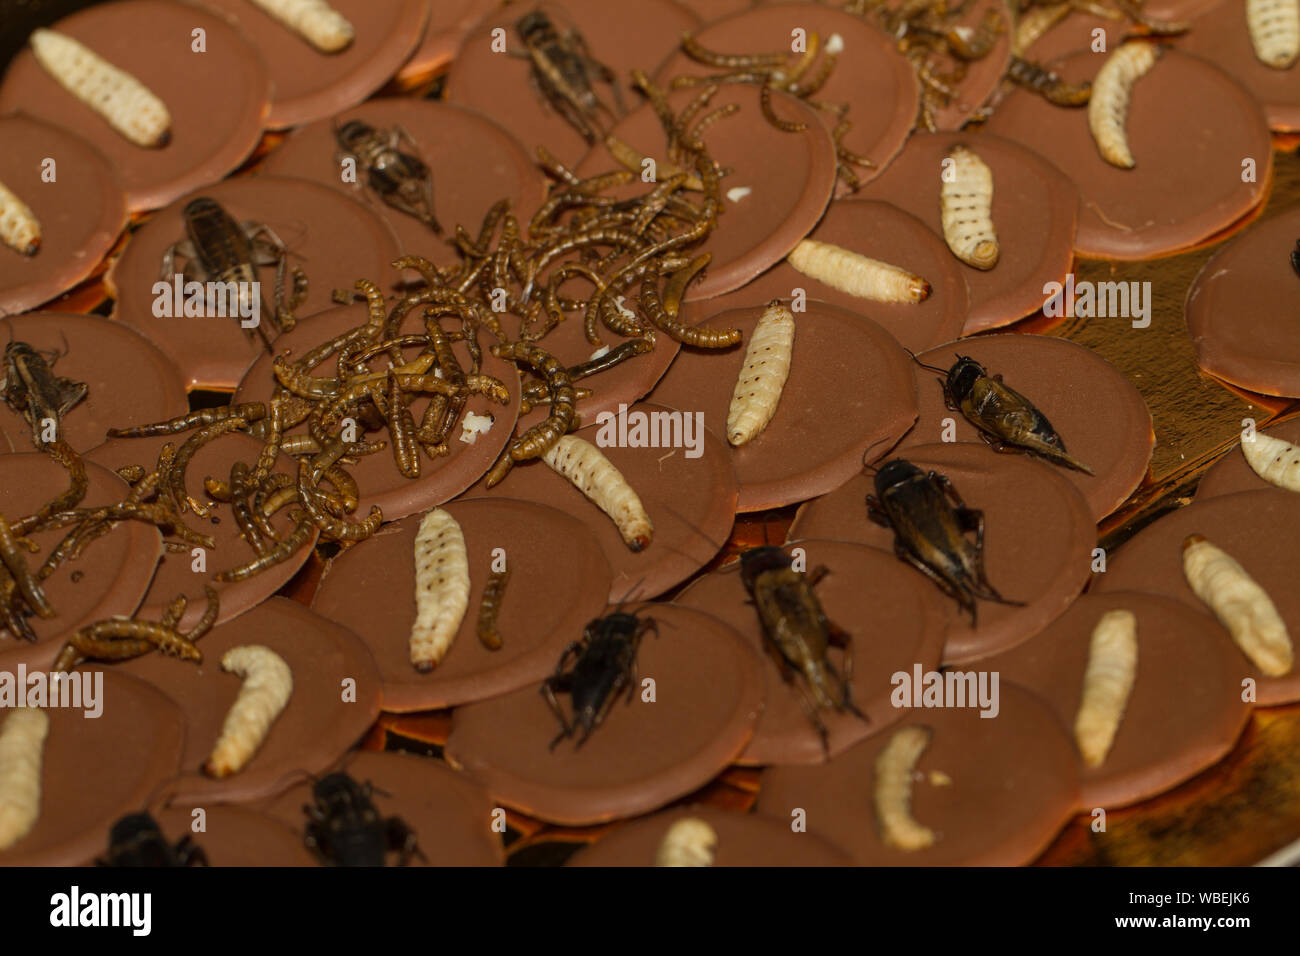 Concept on entomophagy, people eating insects with chocolate Stock Photo